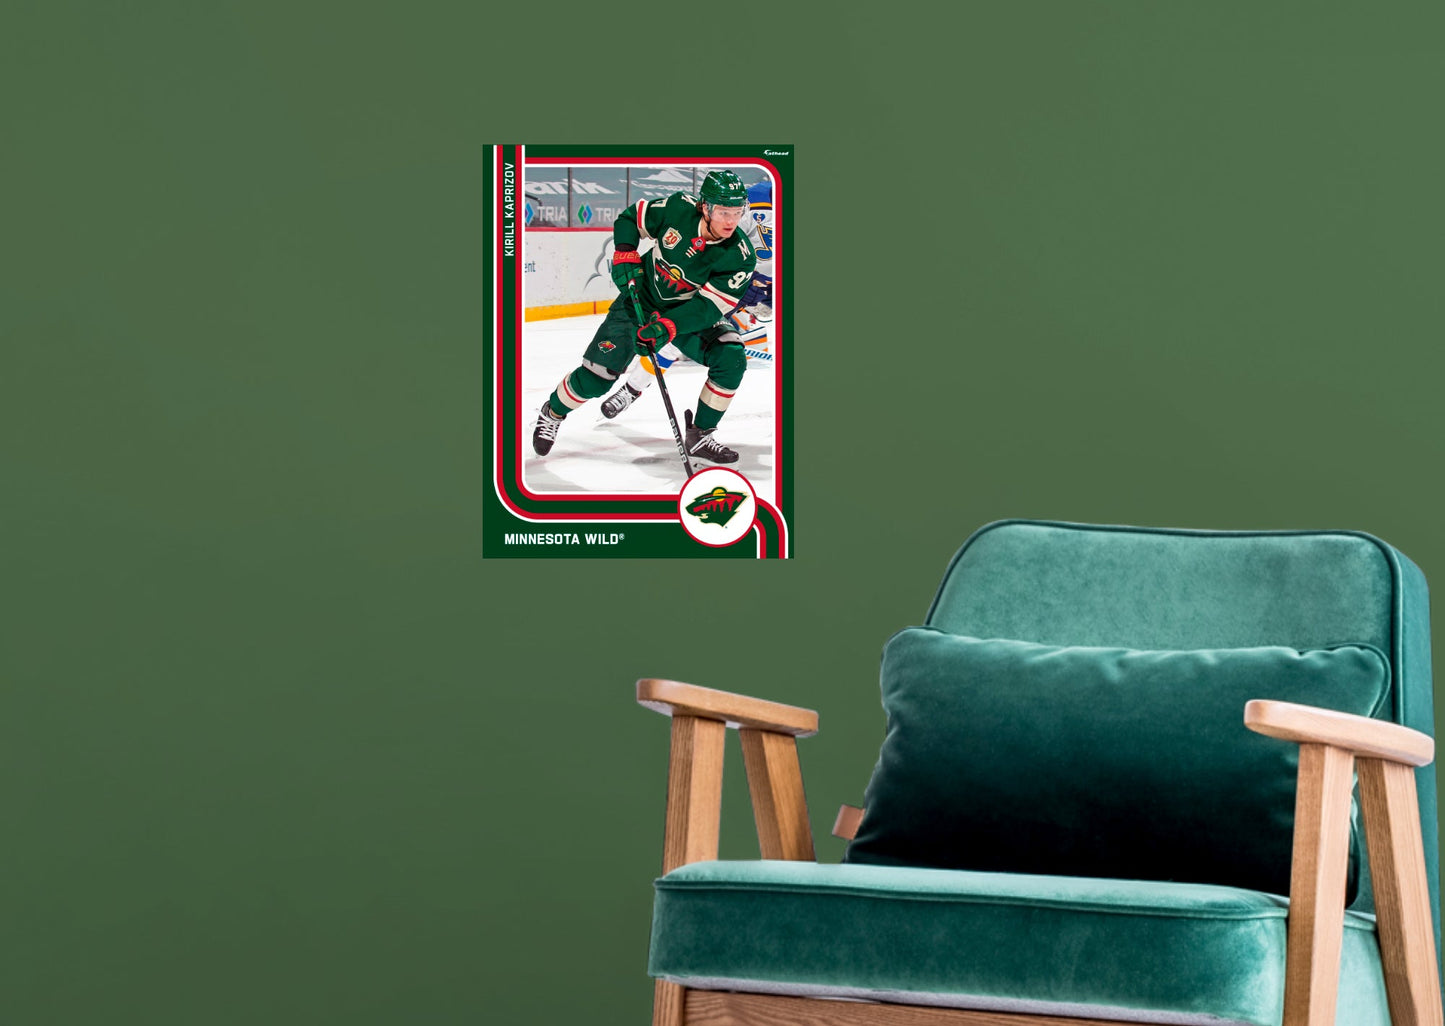 Minnesota Wild: Kirill Kaprizov Poster - Officially Licensed NHL Removable Adhesive Decal